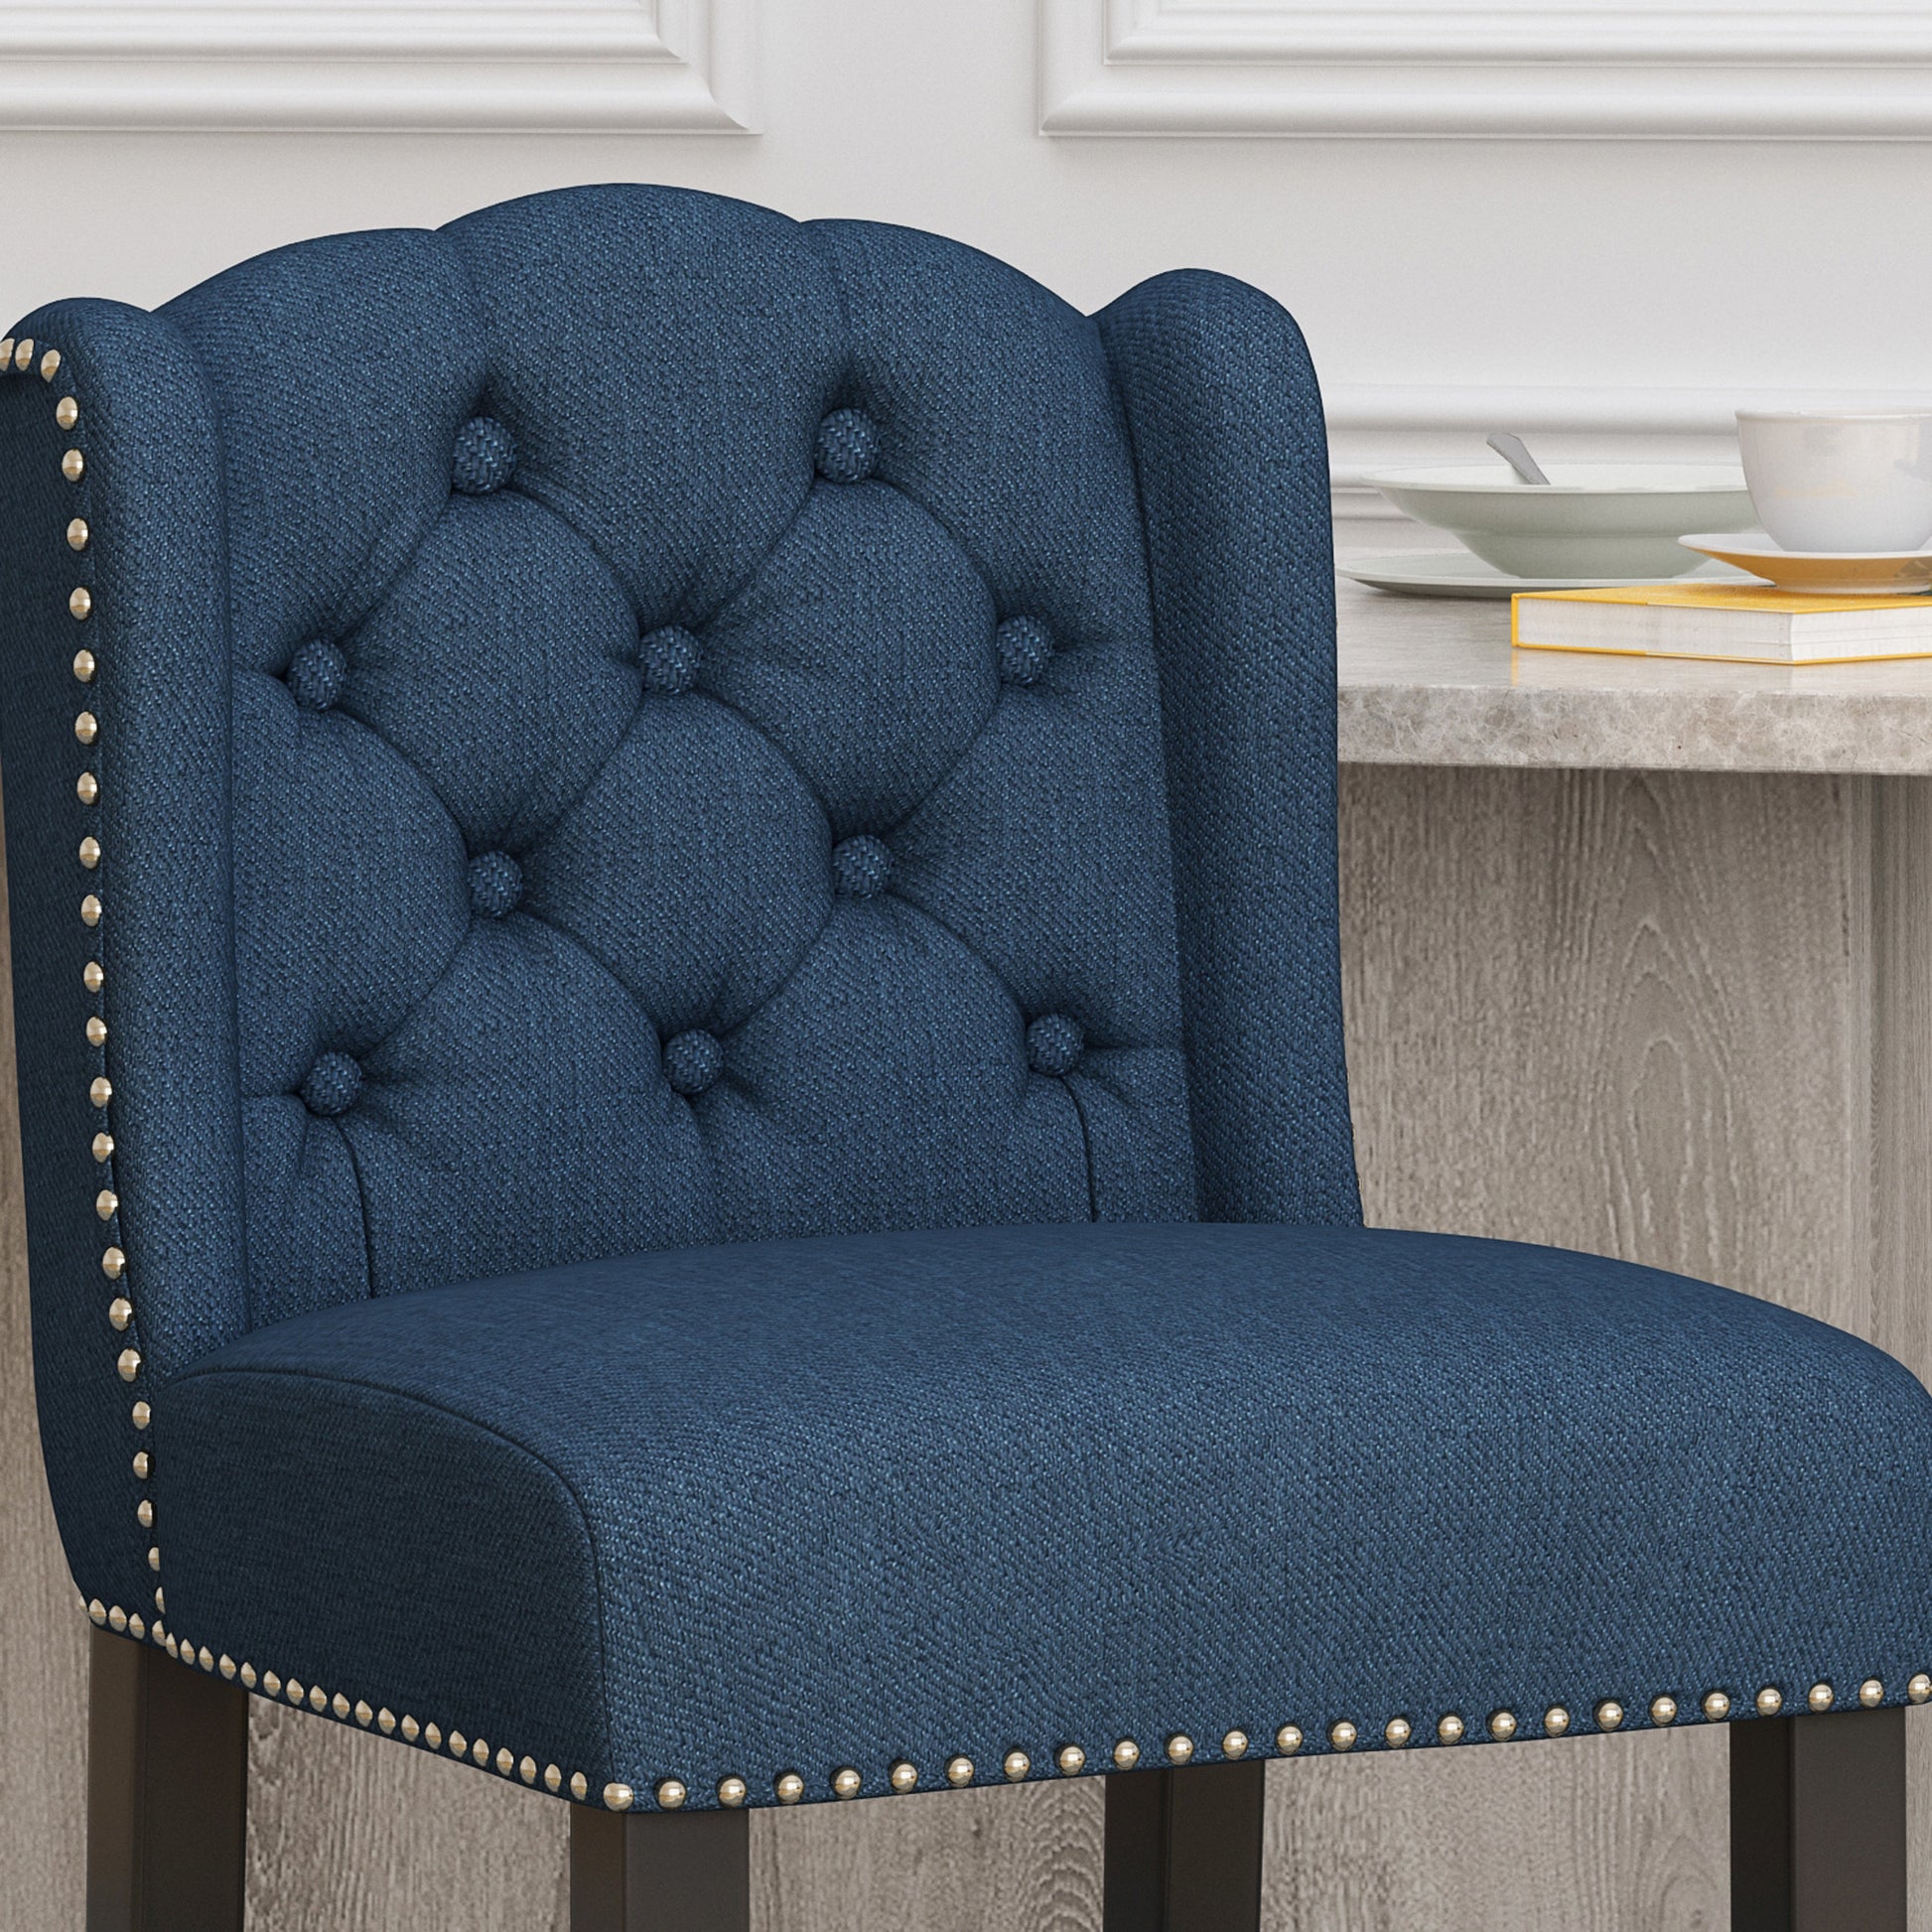 Vienna Contemporary Fabric Tufted Wingback 27 Inch navy blue-fabric